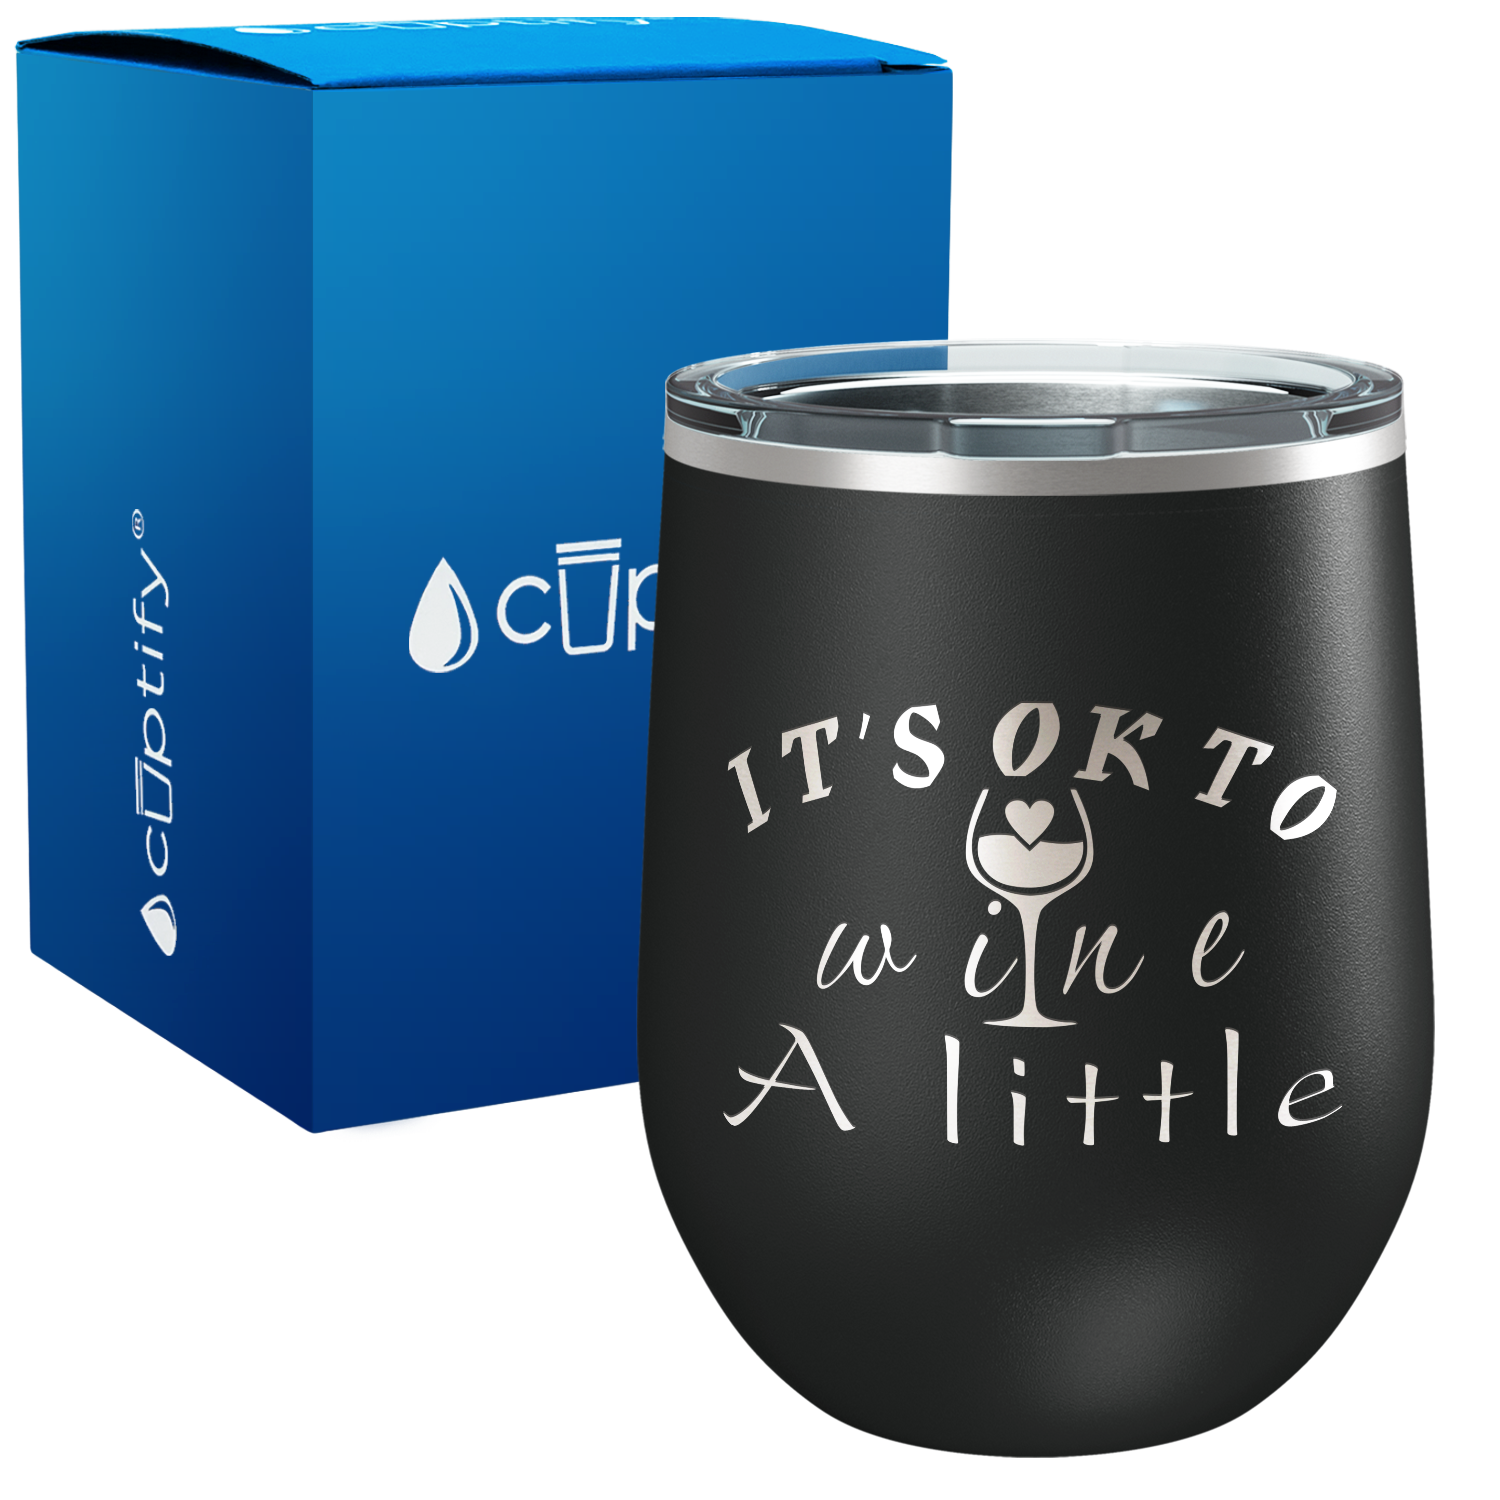 Its Okay To Wine a Little 12oz Funny Wine Tumbler